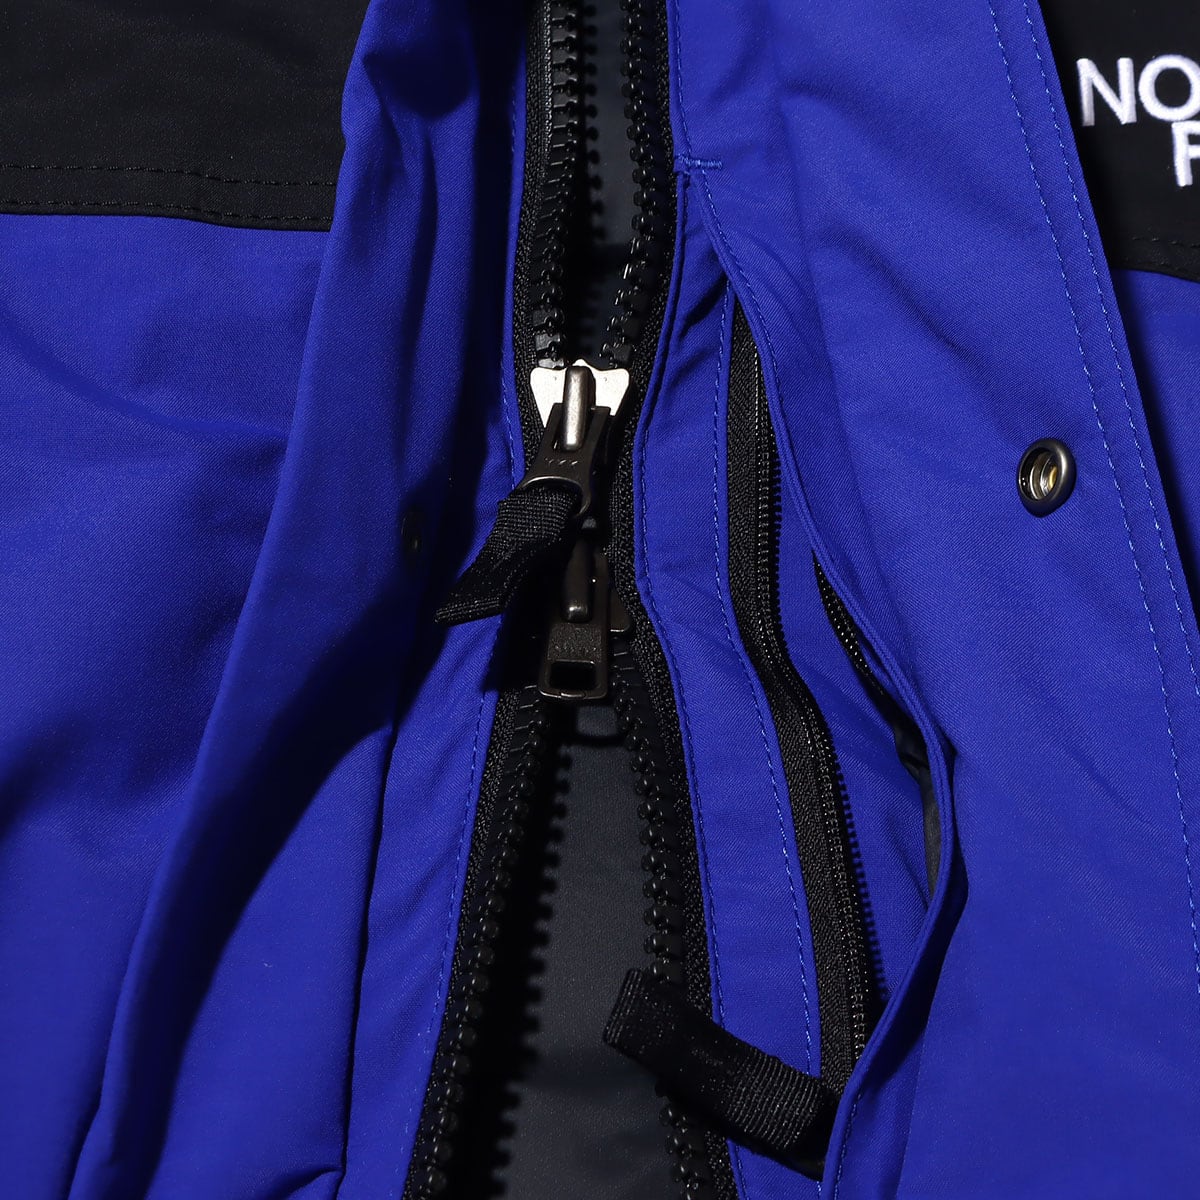 THE NORTH FACE MOUNTAIN DOWN JACKET ラピスブルー 22FW-I